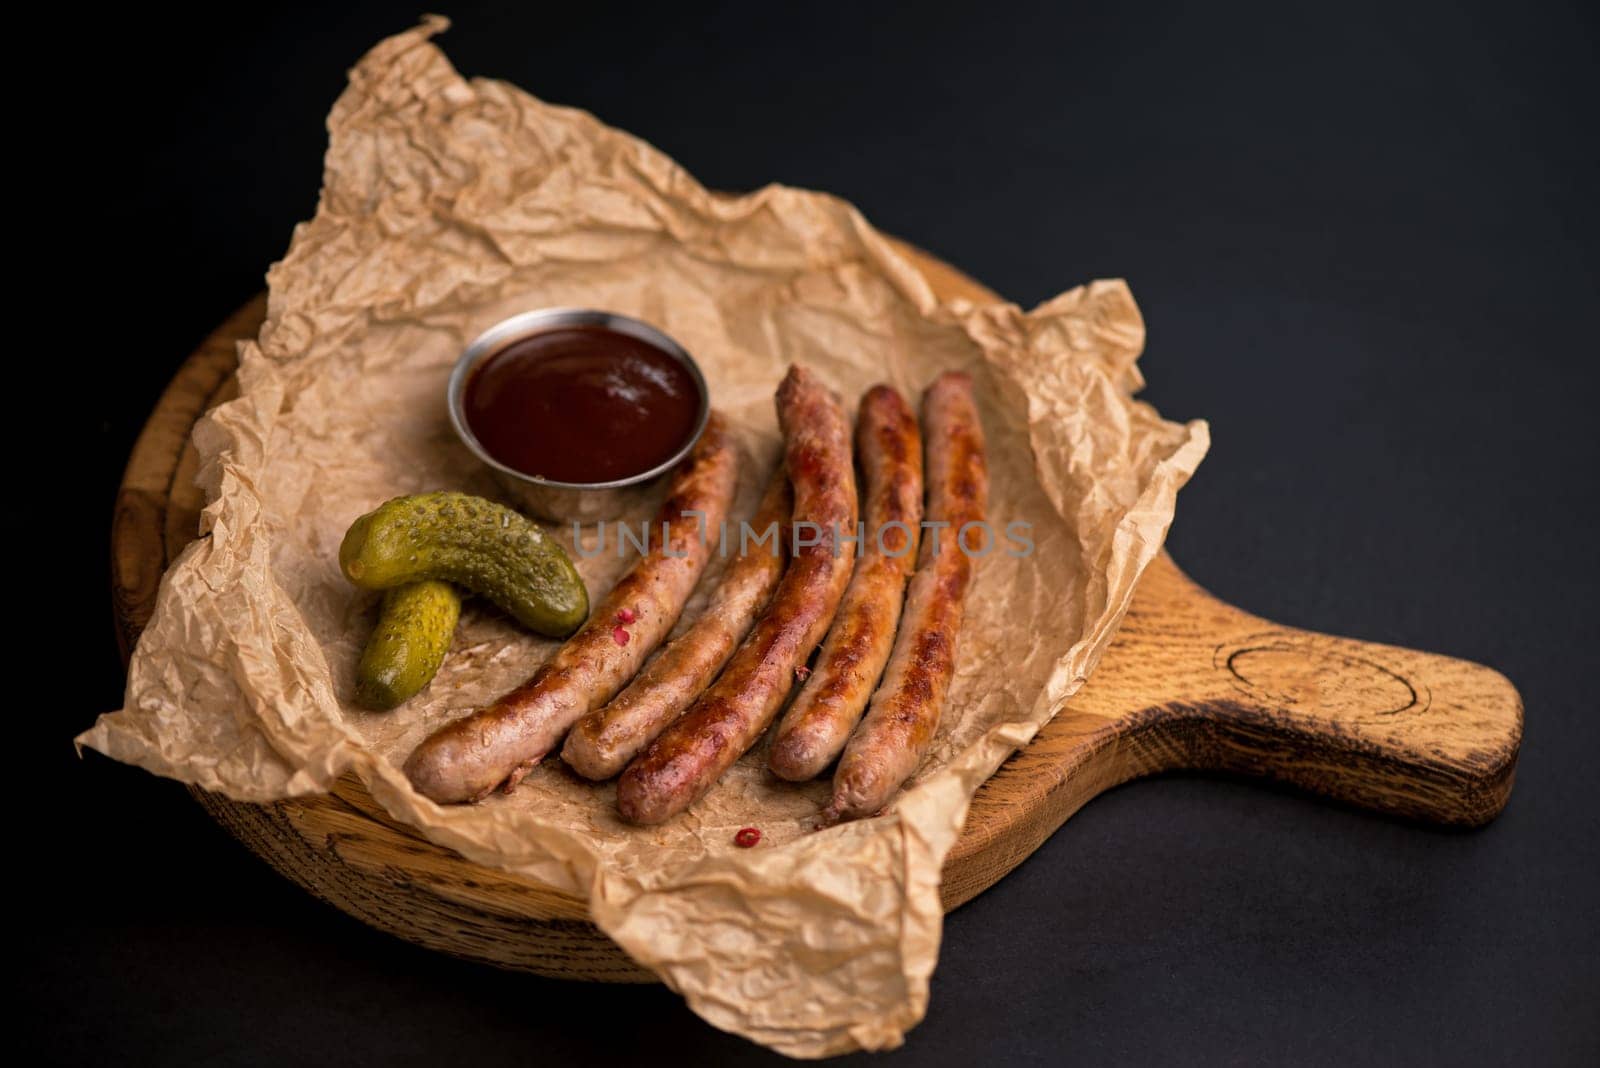 beer snacks - grilled sausages with sauce on a wooden board on a black background by aprilphoto